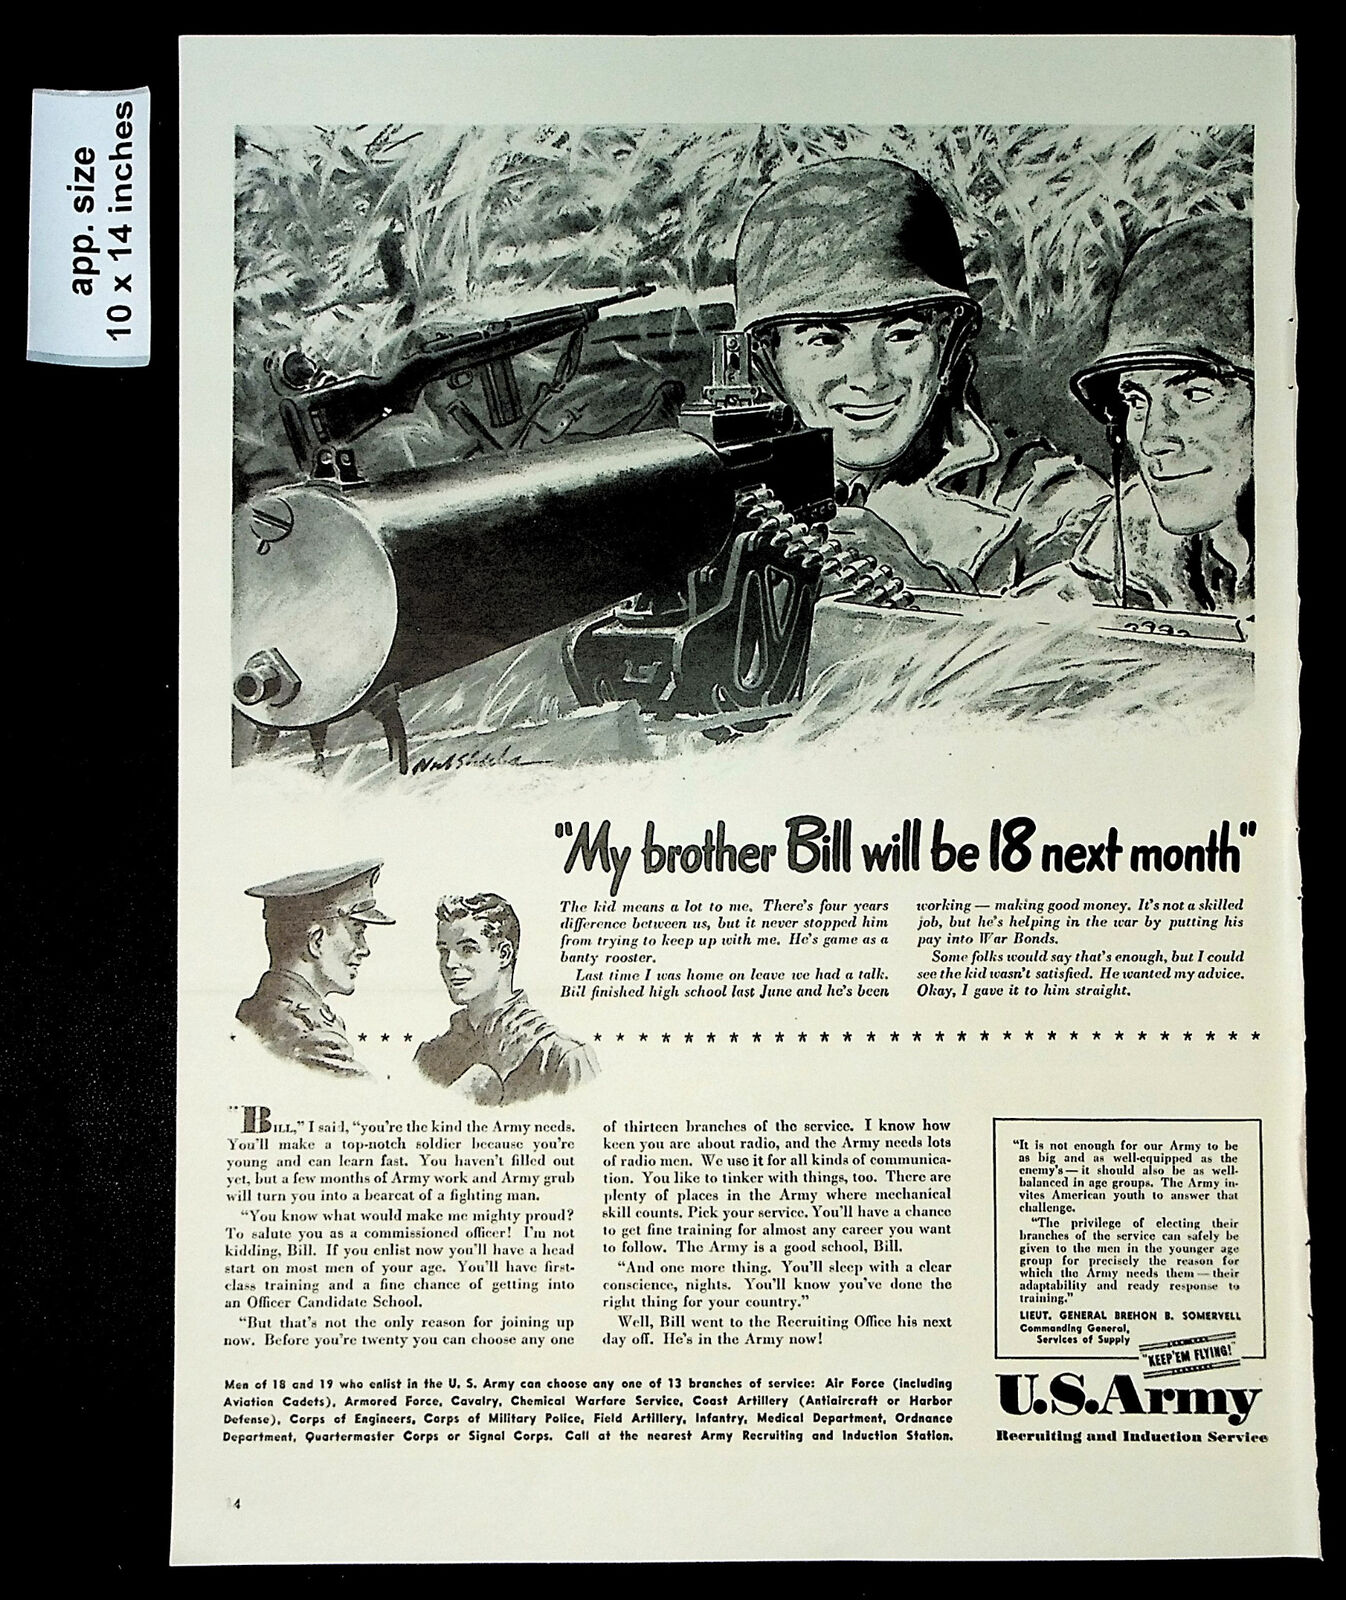 1942 Soliders U.S. Army Recruiting & Induction Service Vintage Print Ad 41005